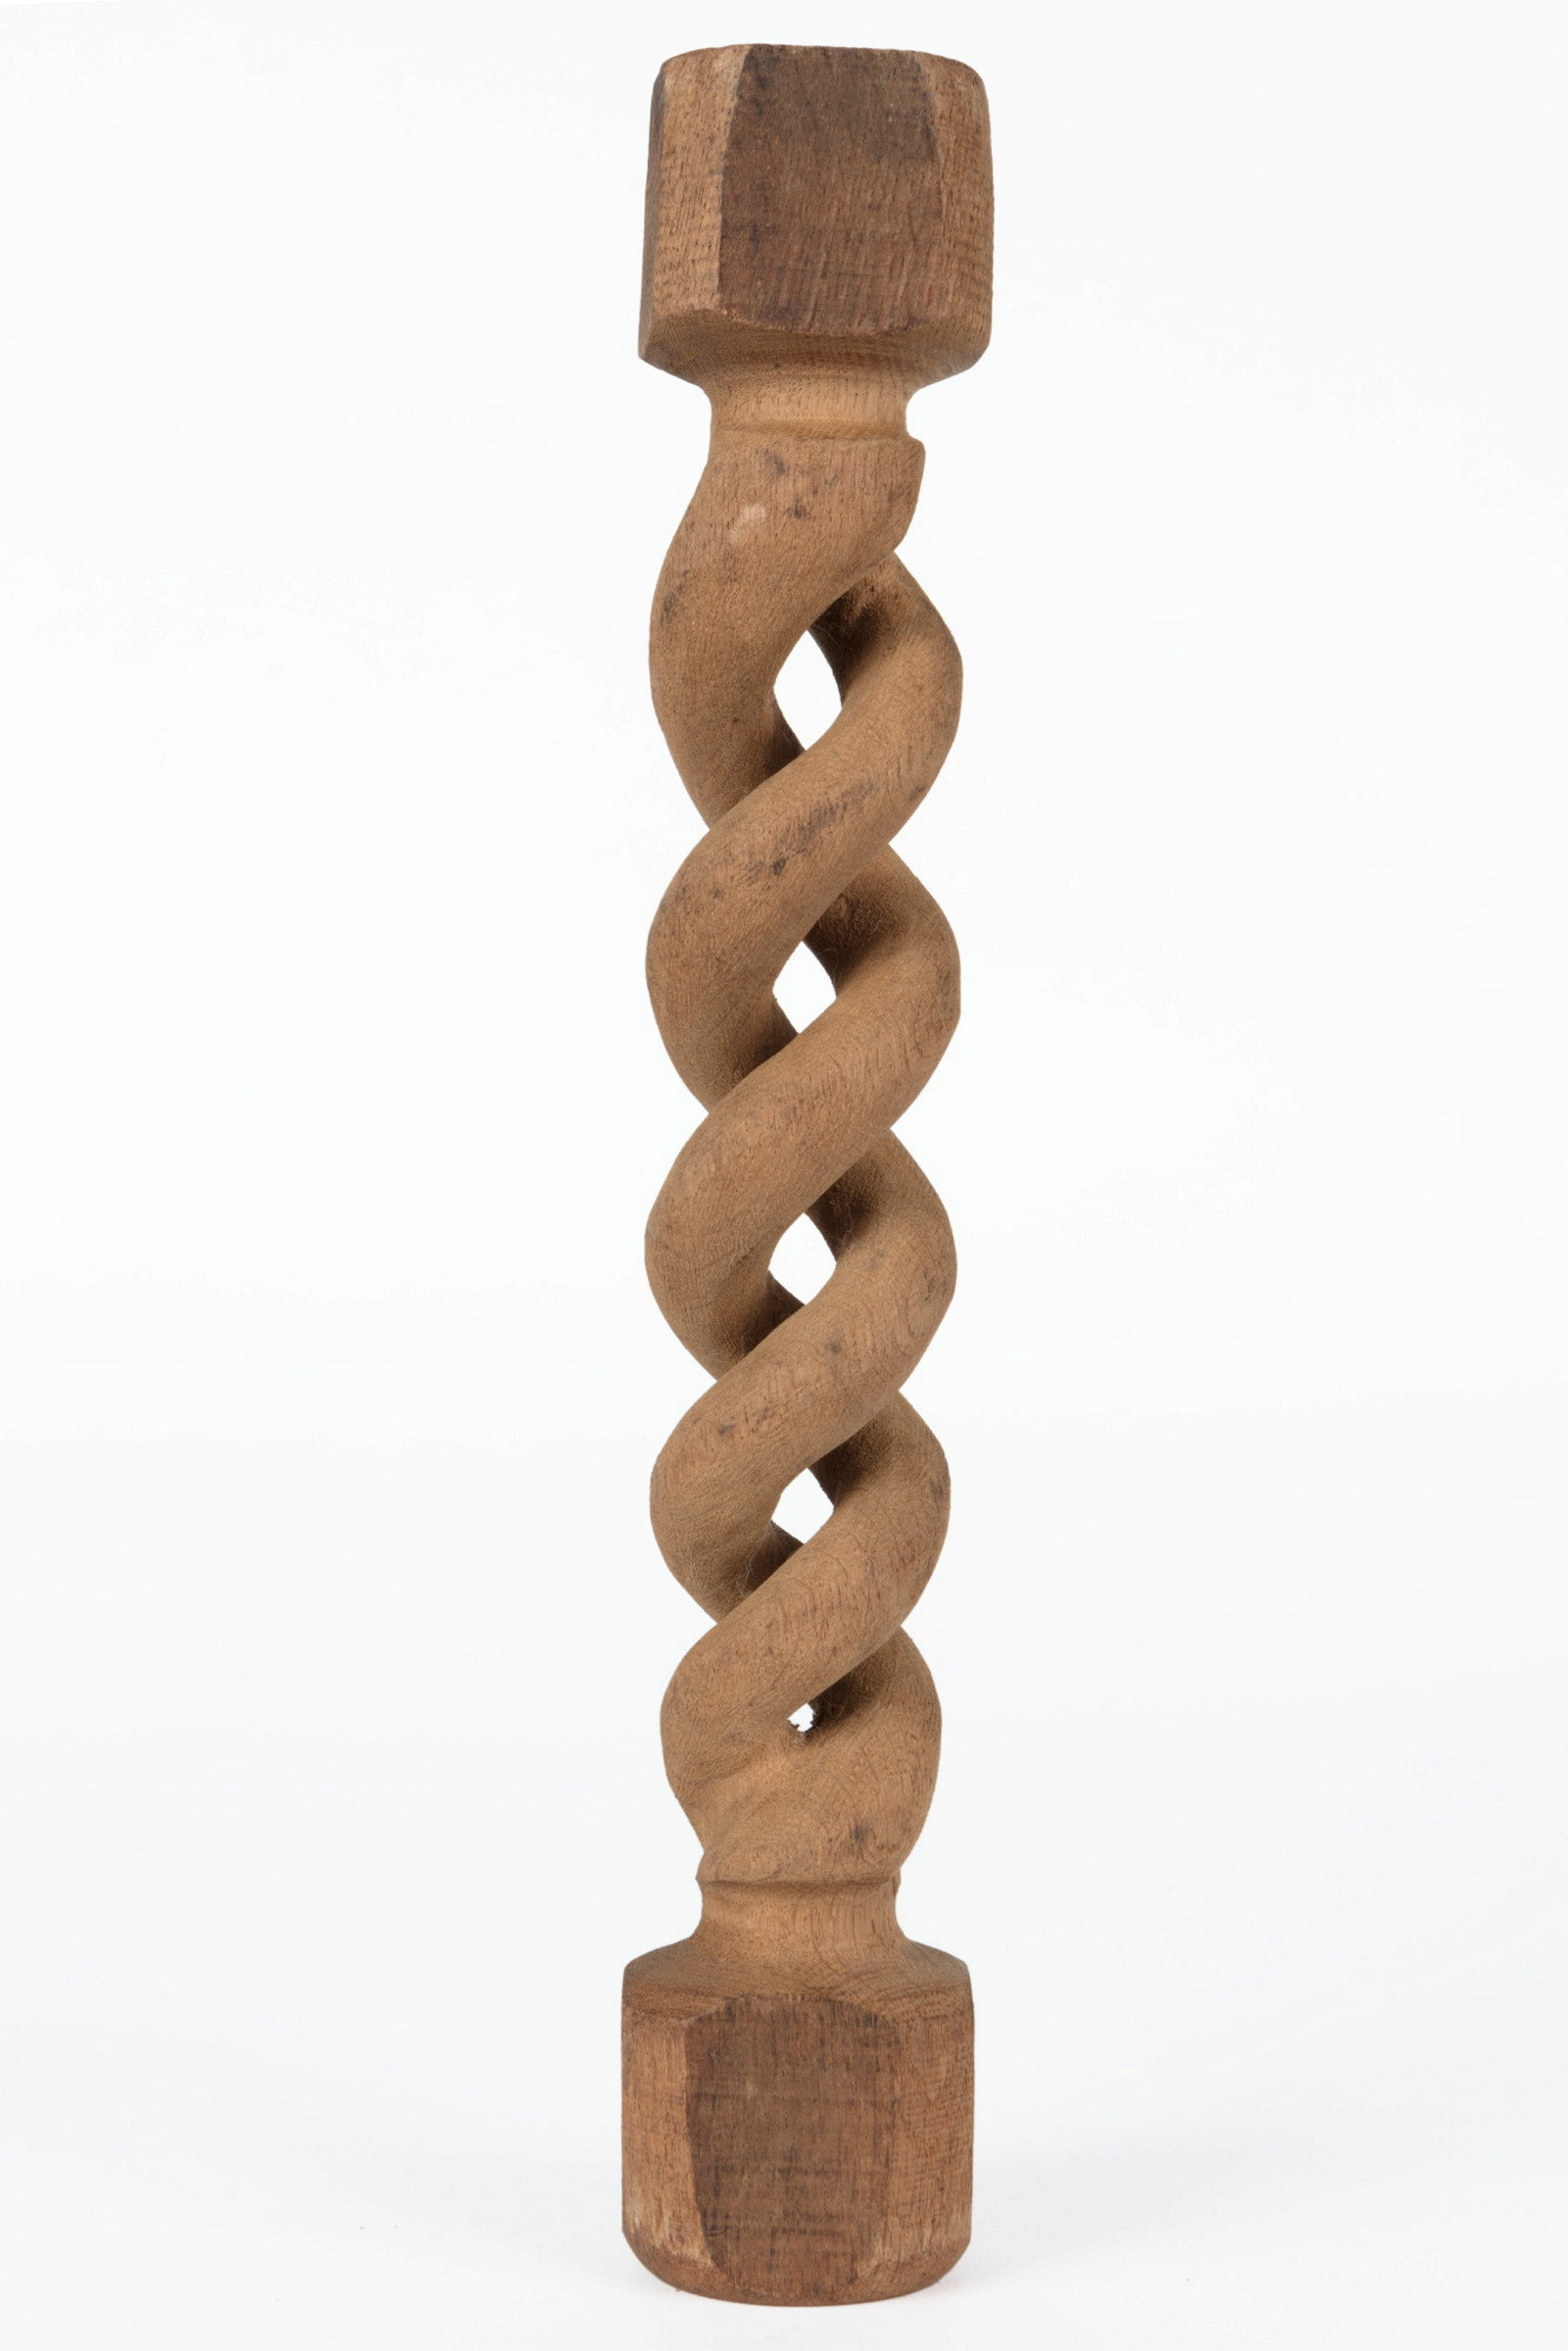 A carved timber furniture leg